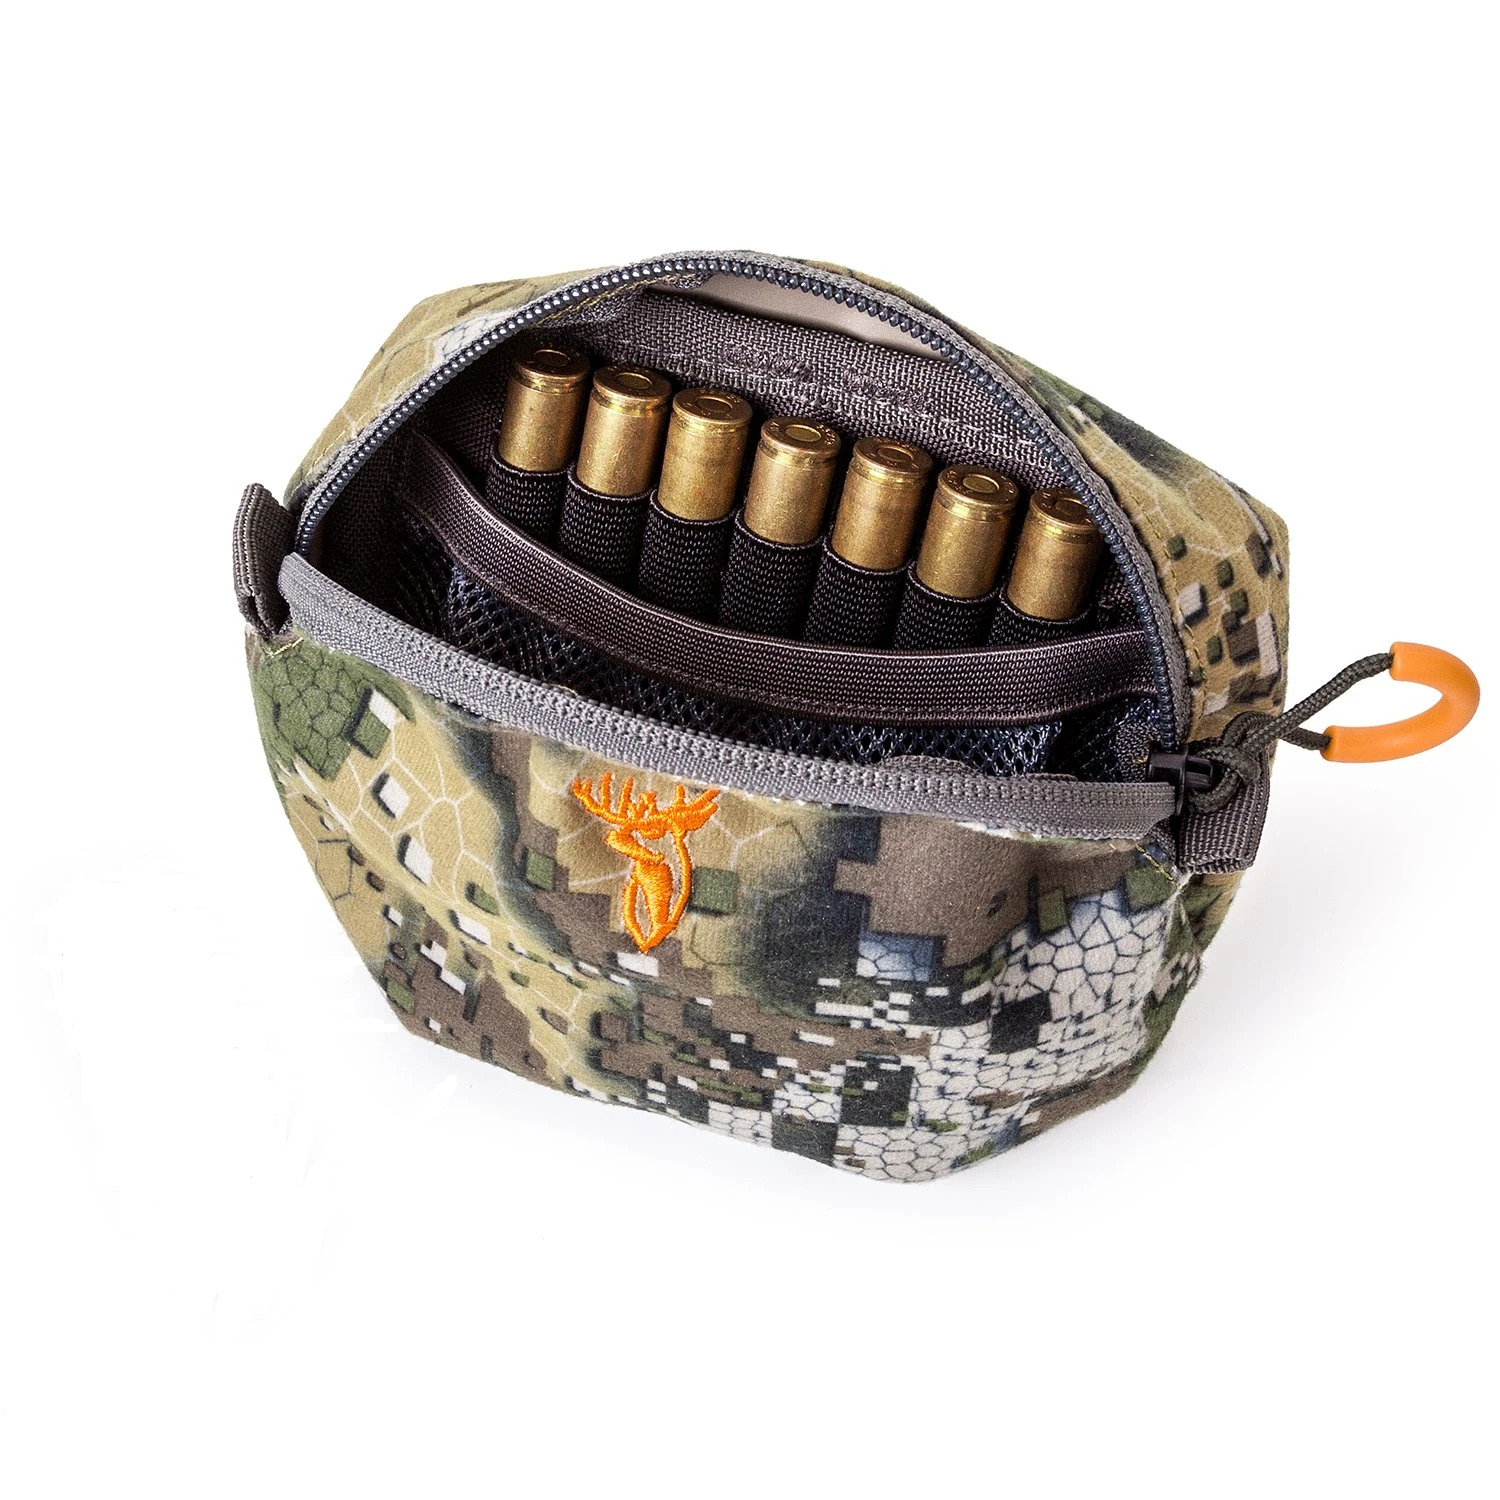 Hunters Element Edge Pouch Desolve Veil - Medium -  - Mansfield Hunting & Fishing - Products to prepare for Corona Virus